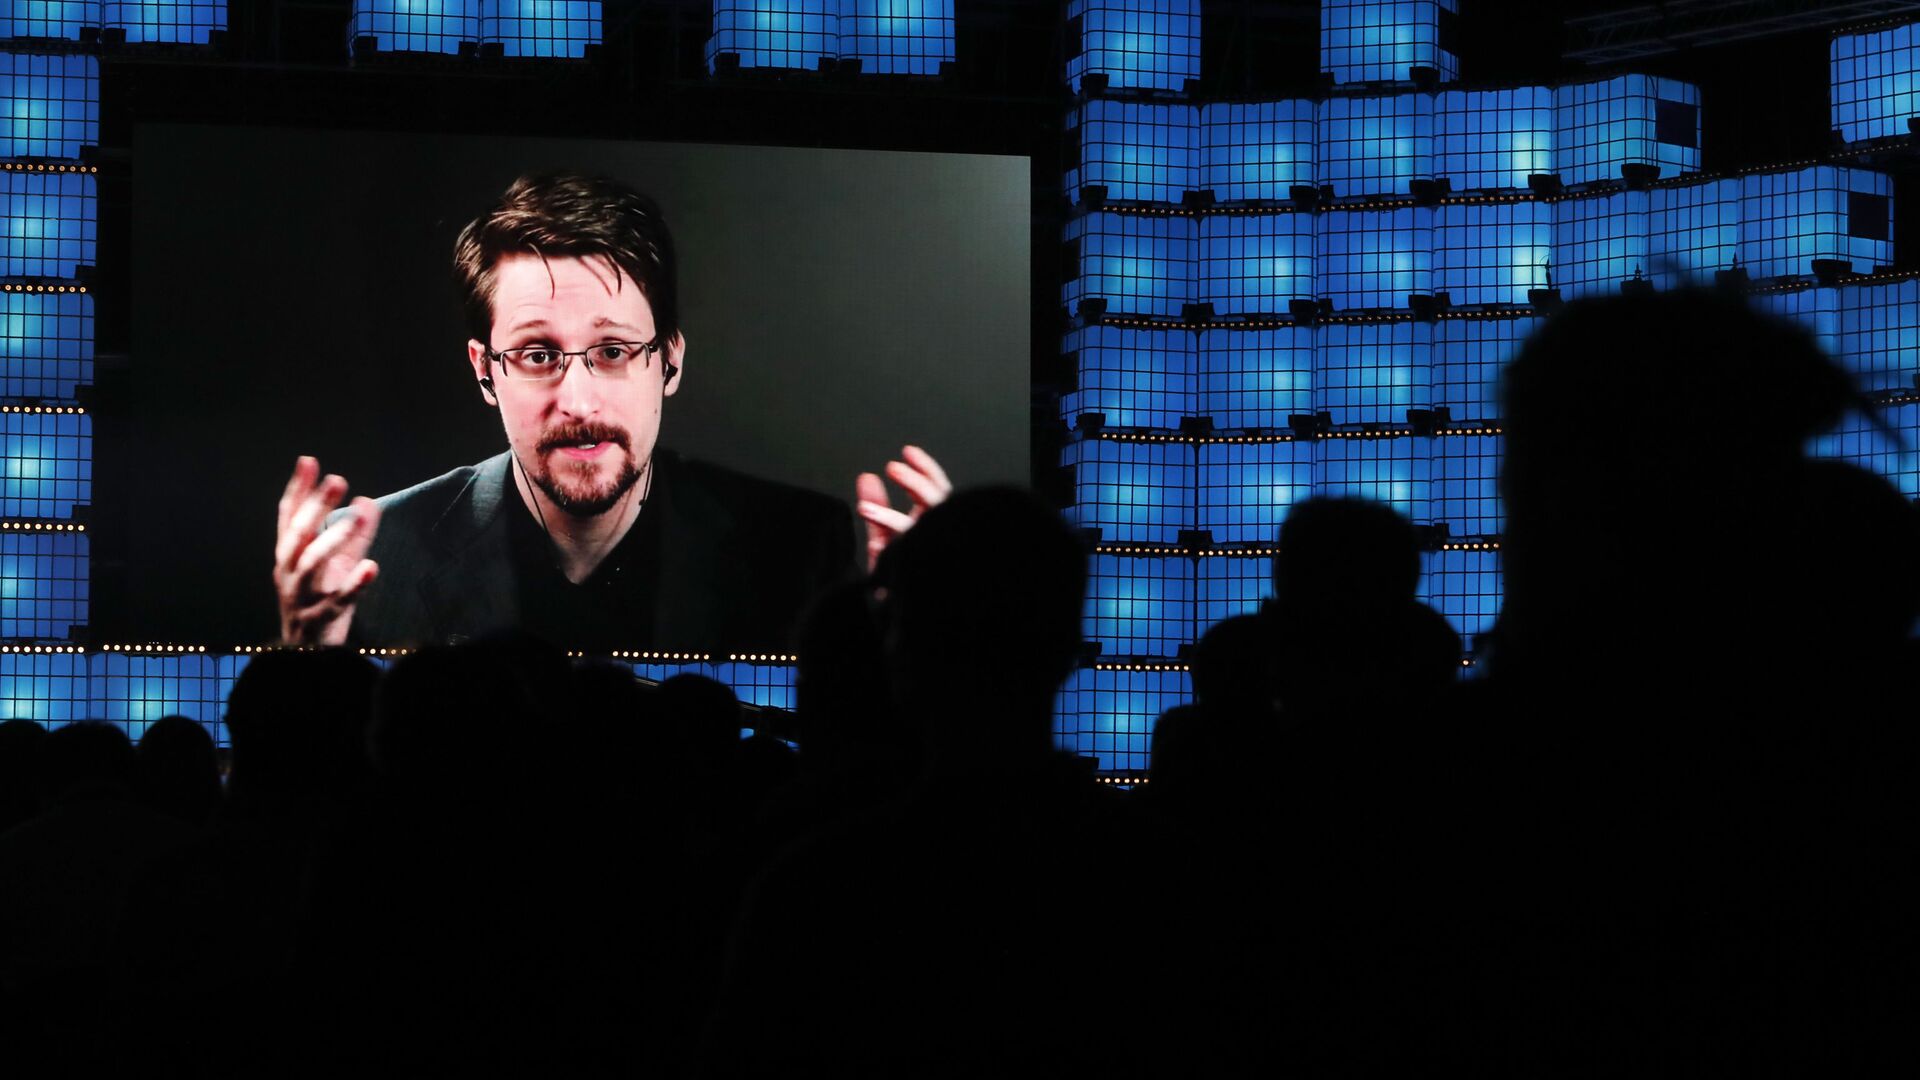 Former U.S. National Security Agency contractor Edward Snowden addresses attendees through video link at the Web Summit technology conference in Lisbon, Monday, Nov. 4, 2019 - Sputnik International, 1920, 26.09.2022